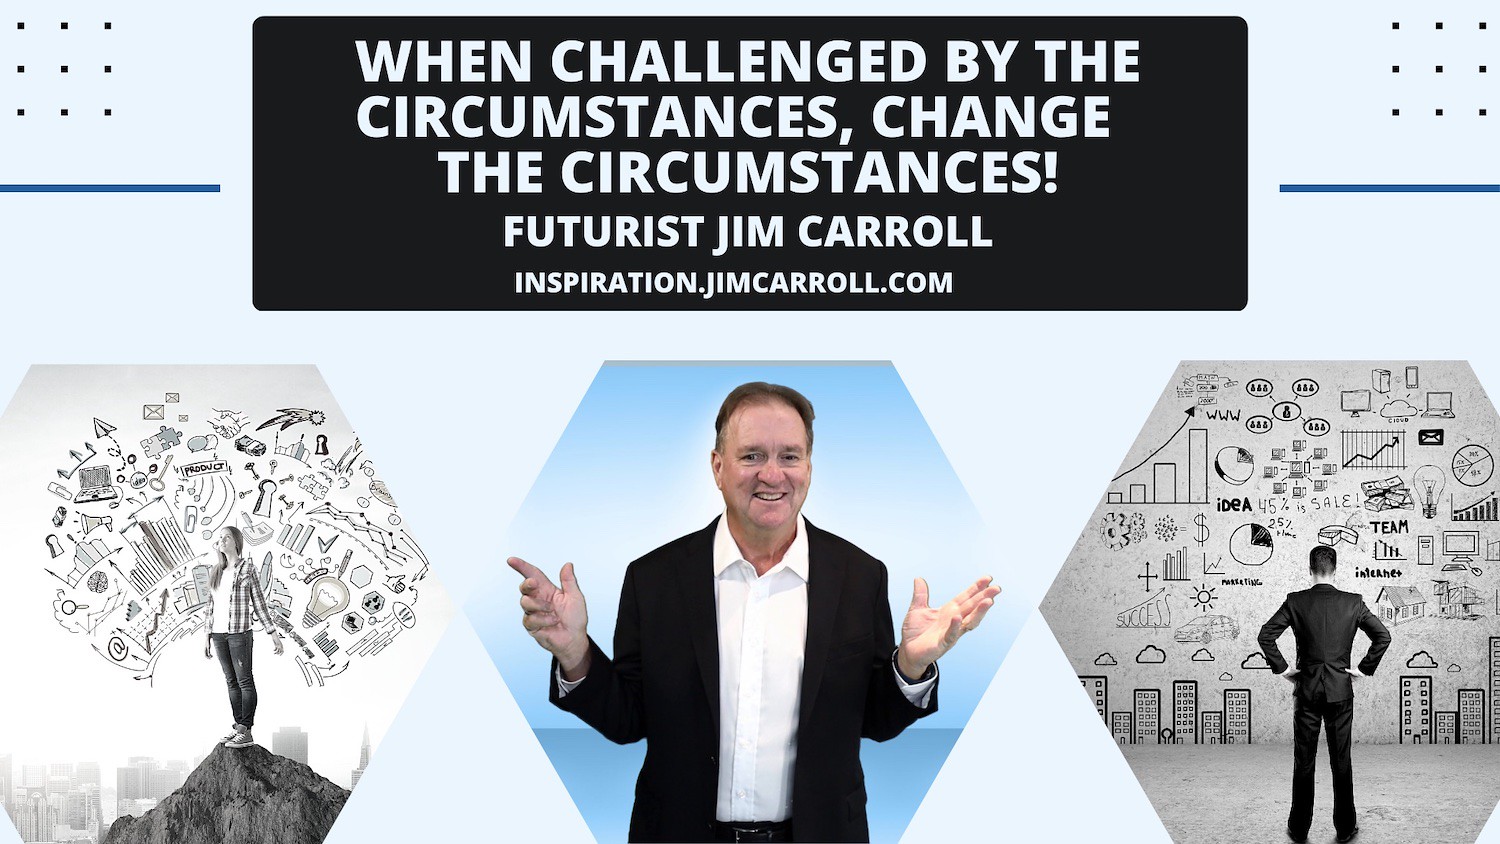 "When challenged by the circumstances, change the circumstances!" - Futurist Jim Carroll